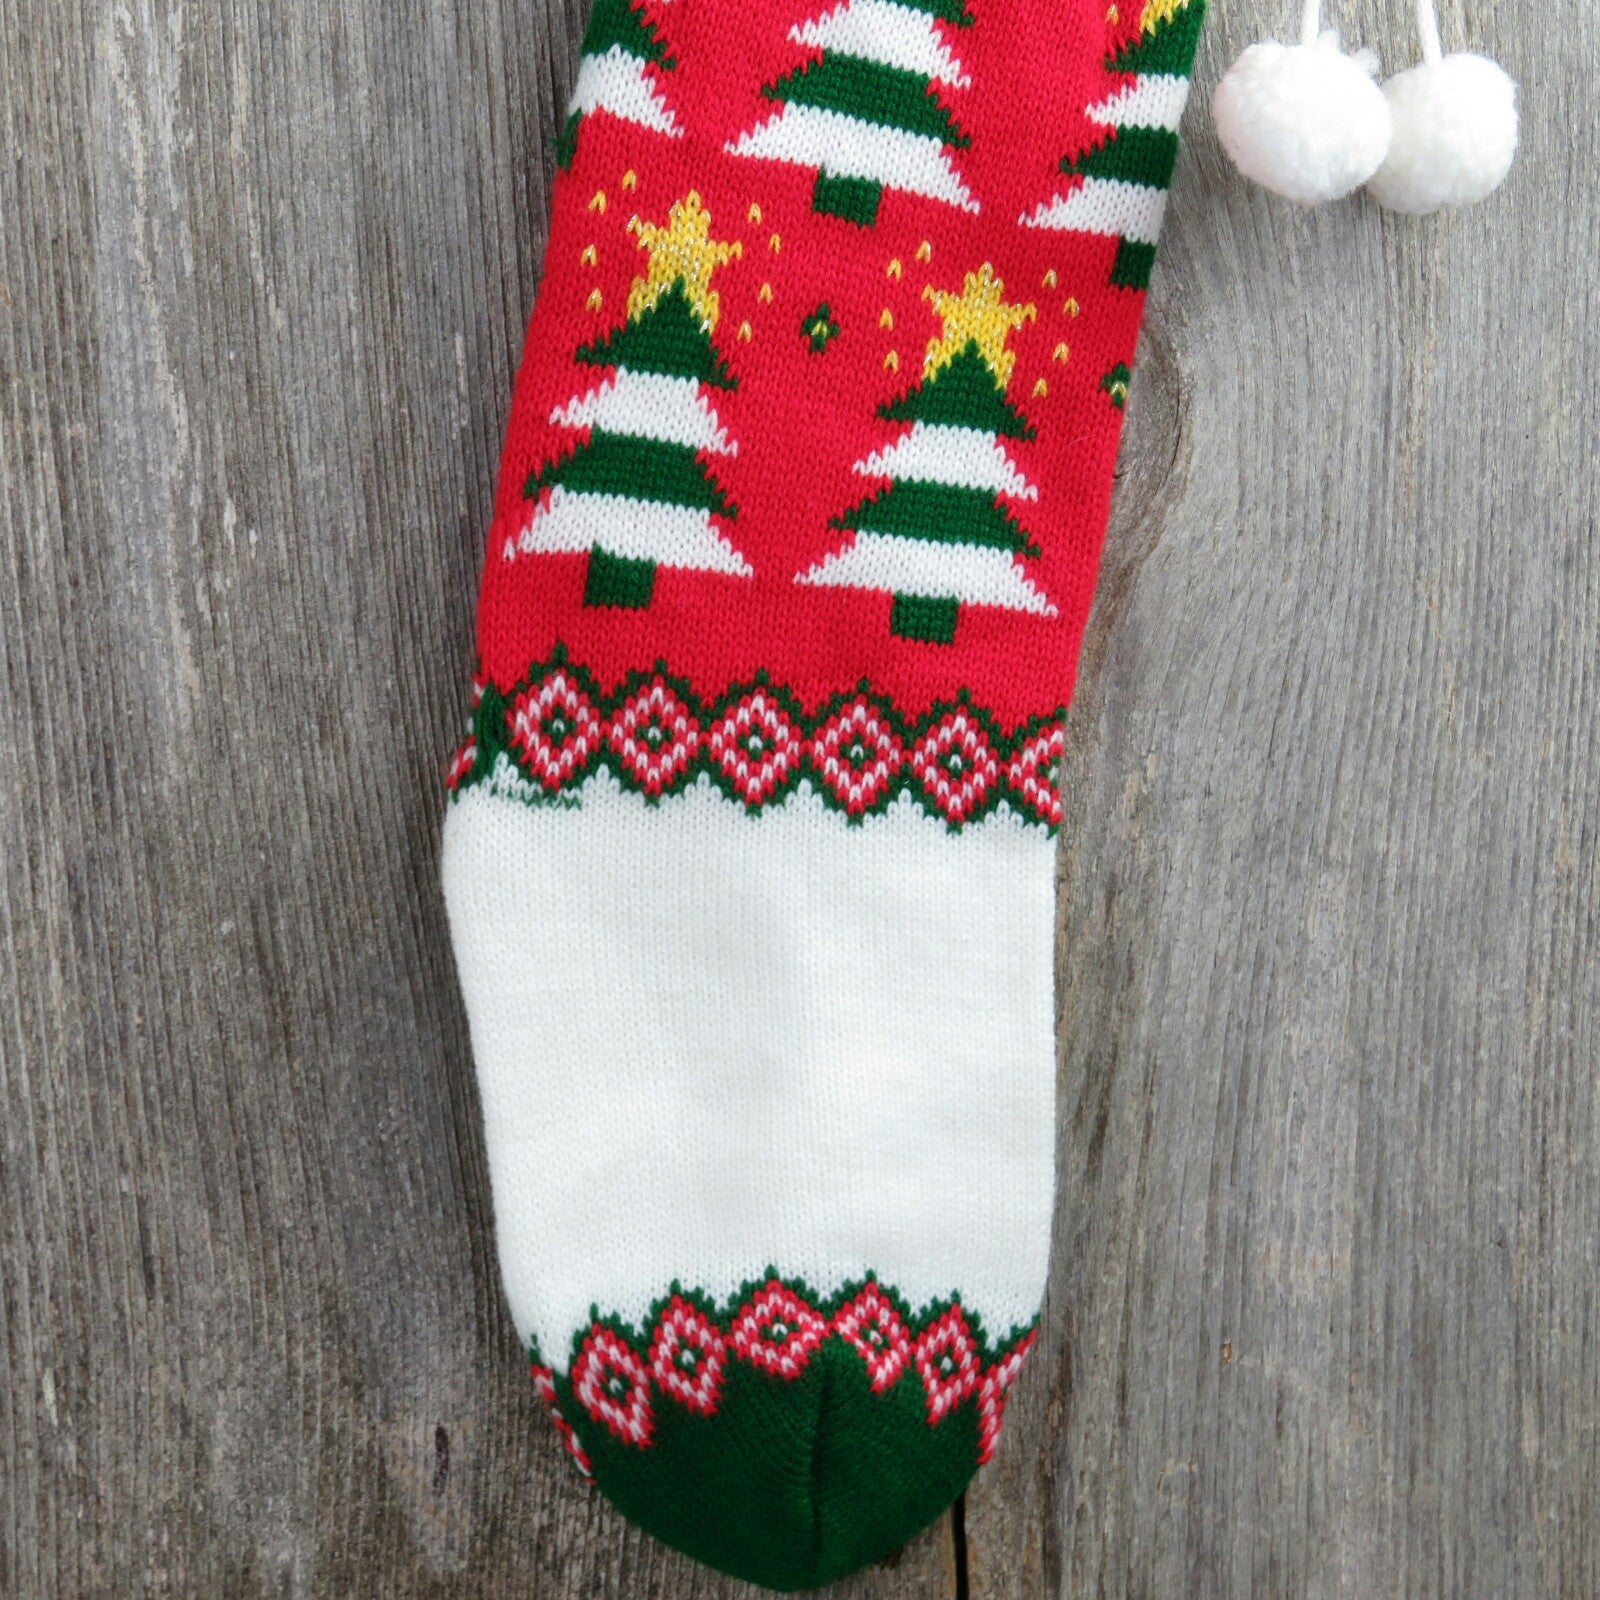 Vintage Tree Striped Stocking Knit Red Green Christmas Knitted Star White Poms Holiday Decor 1980s - At Grandma's Table